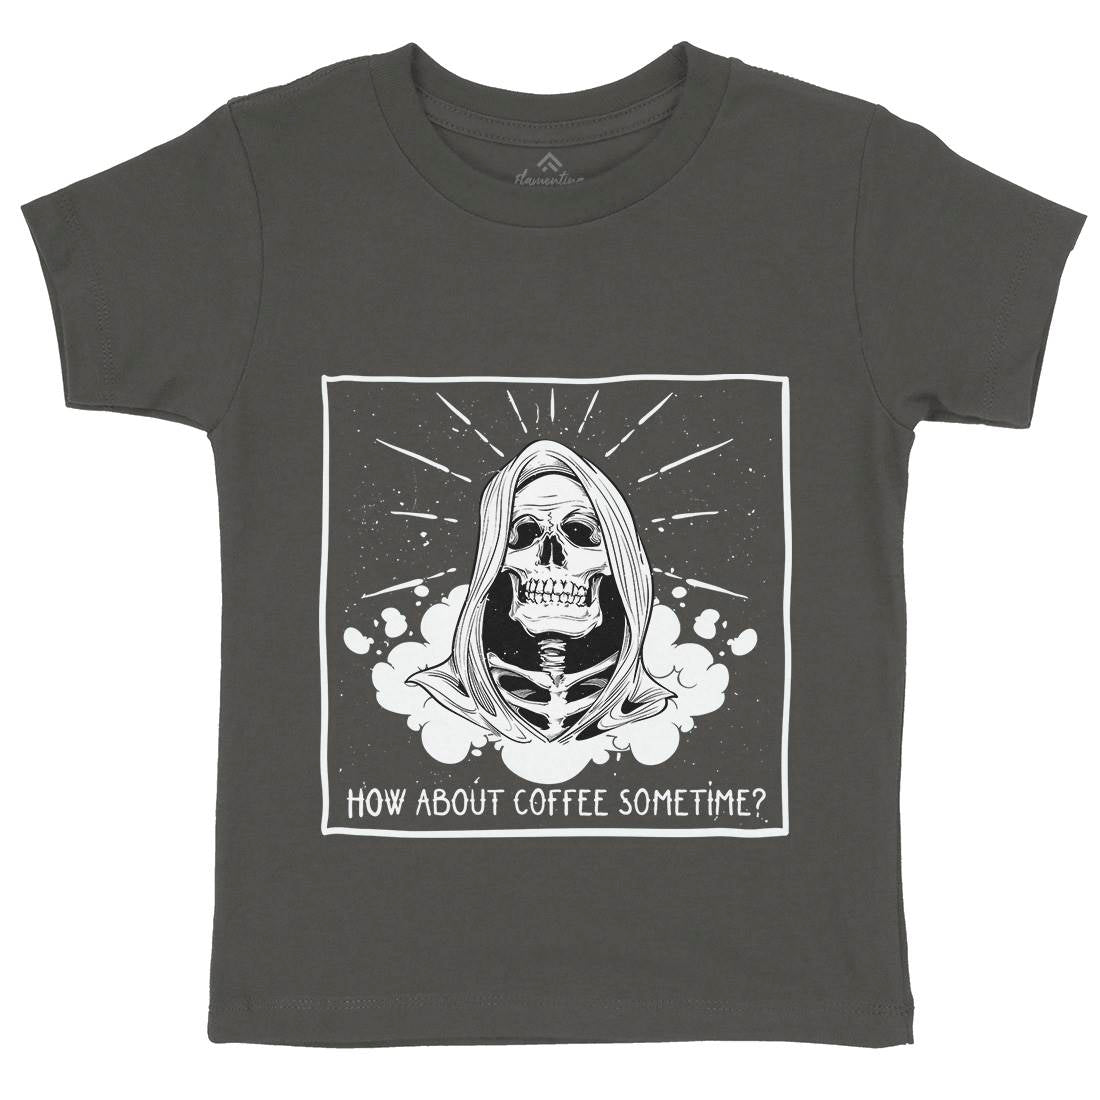 How About Coffee Kids Crew Neck T-Shirt Funny D463